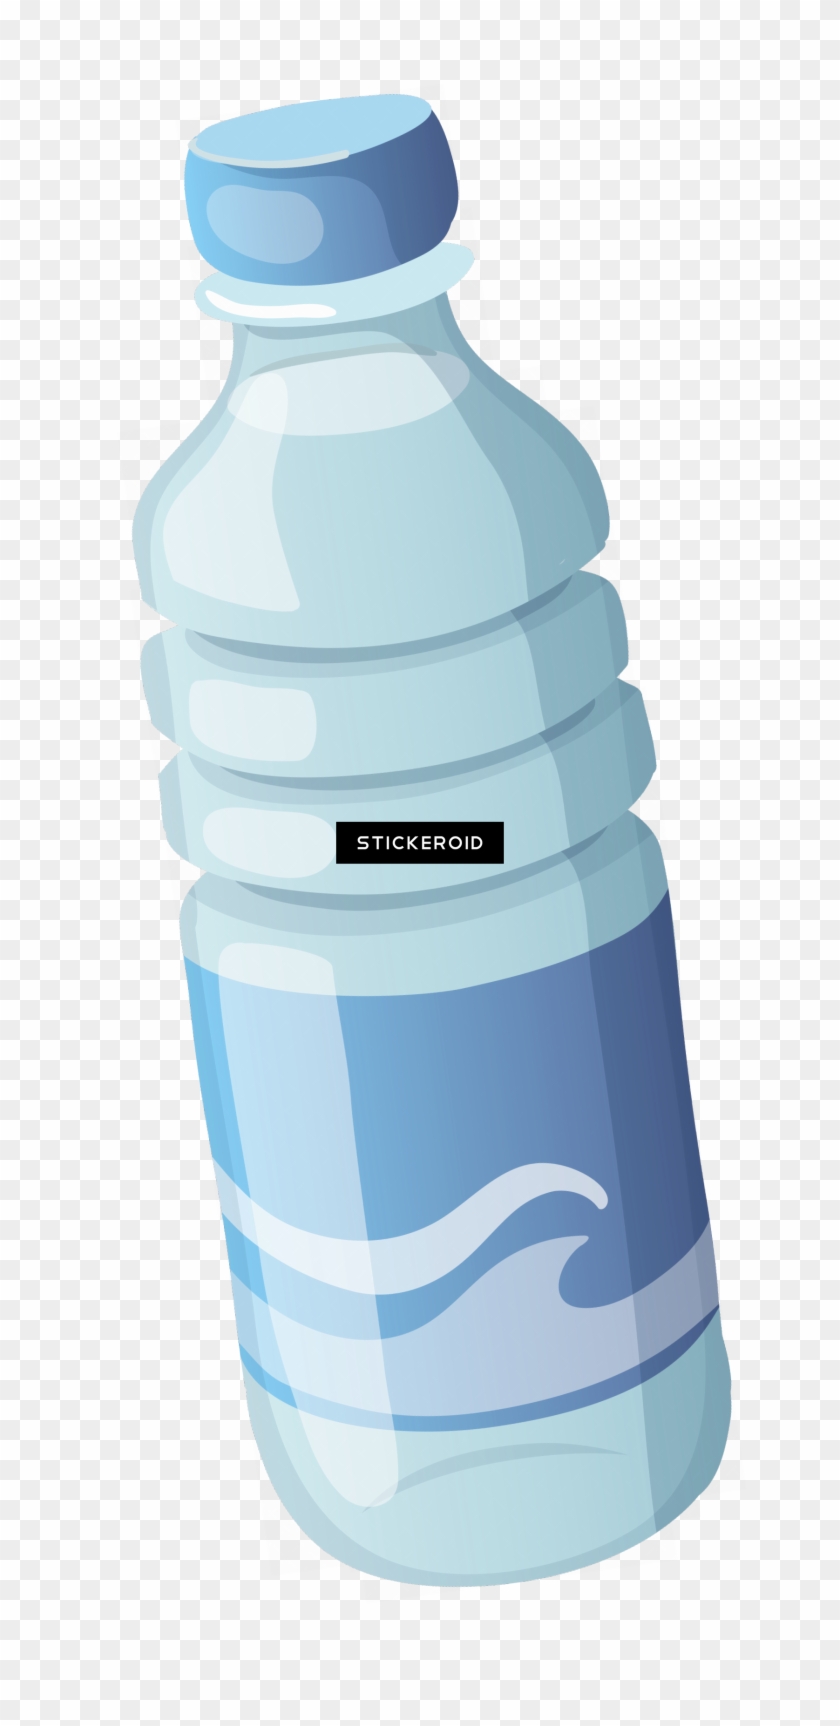 https://www.pngfind.com/pngs/m/606-6066993_bottled-water-png-transparent-background-art-png-download.png